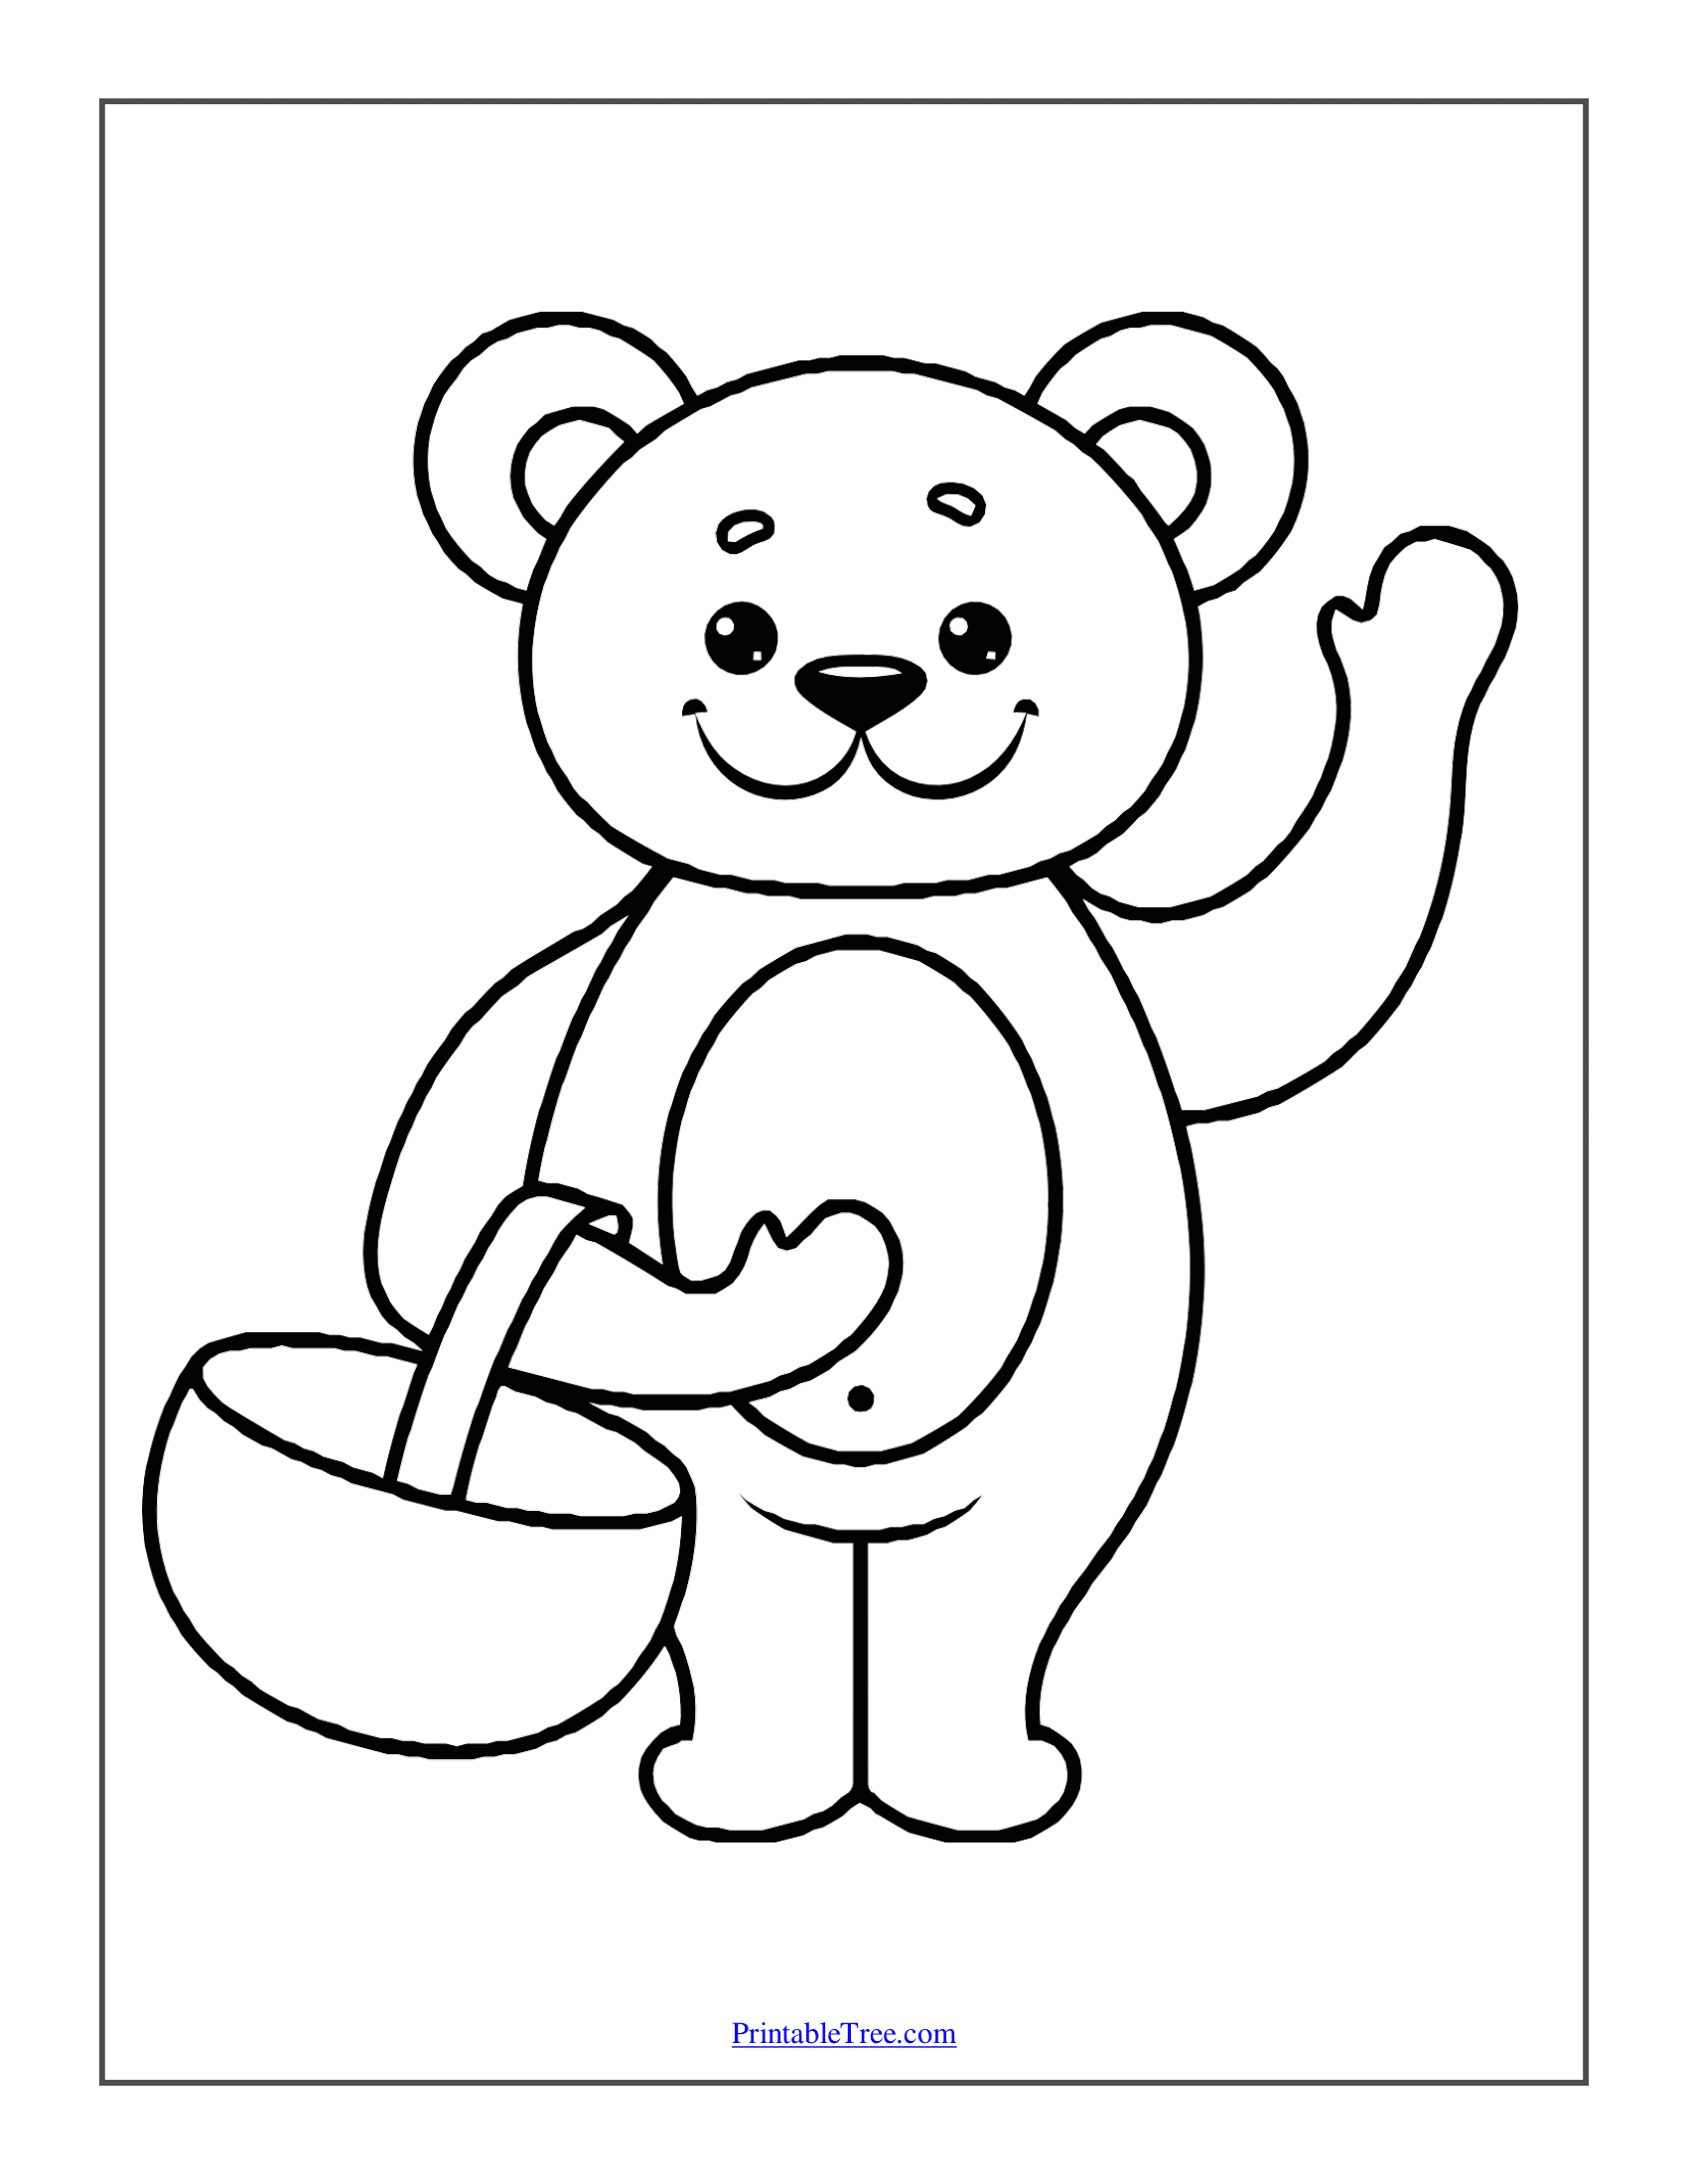 Free Teddy Bear Drawing, Download Free Teddy Bear Drawing png images, Free  ClipArts on Clipart Library